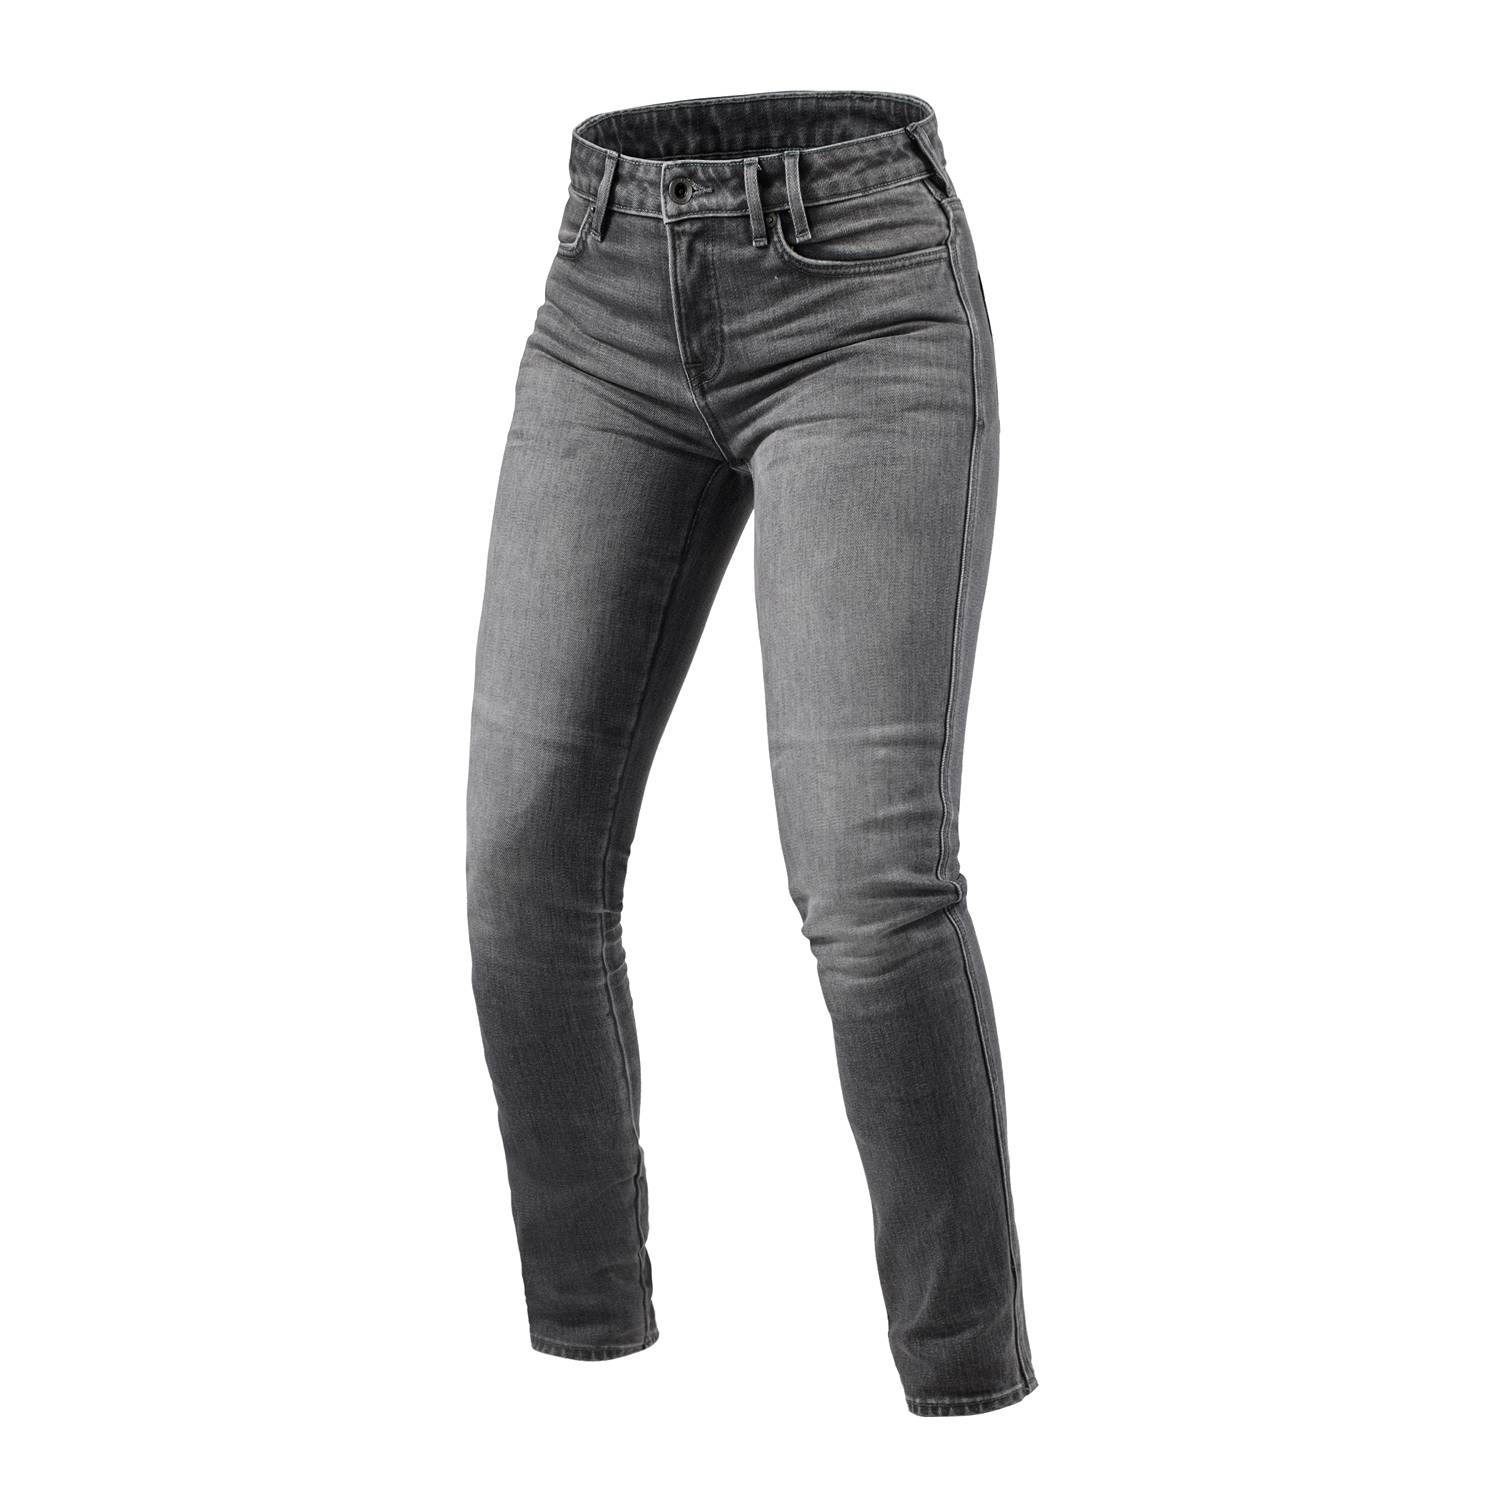 Image of EU REV'IT! Jeans Shelby 2 Ladies SK Medium Grey Stone L30 Taille L30/W31